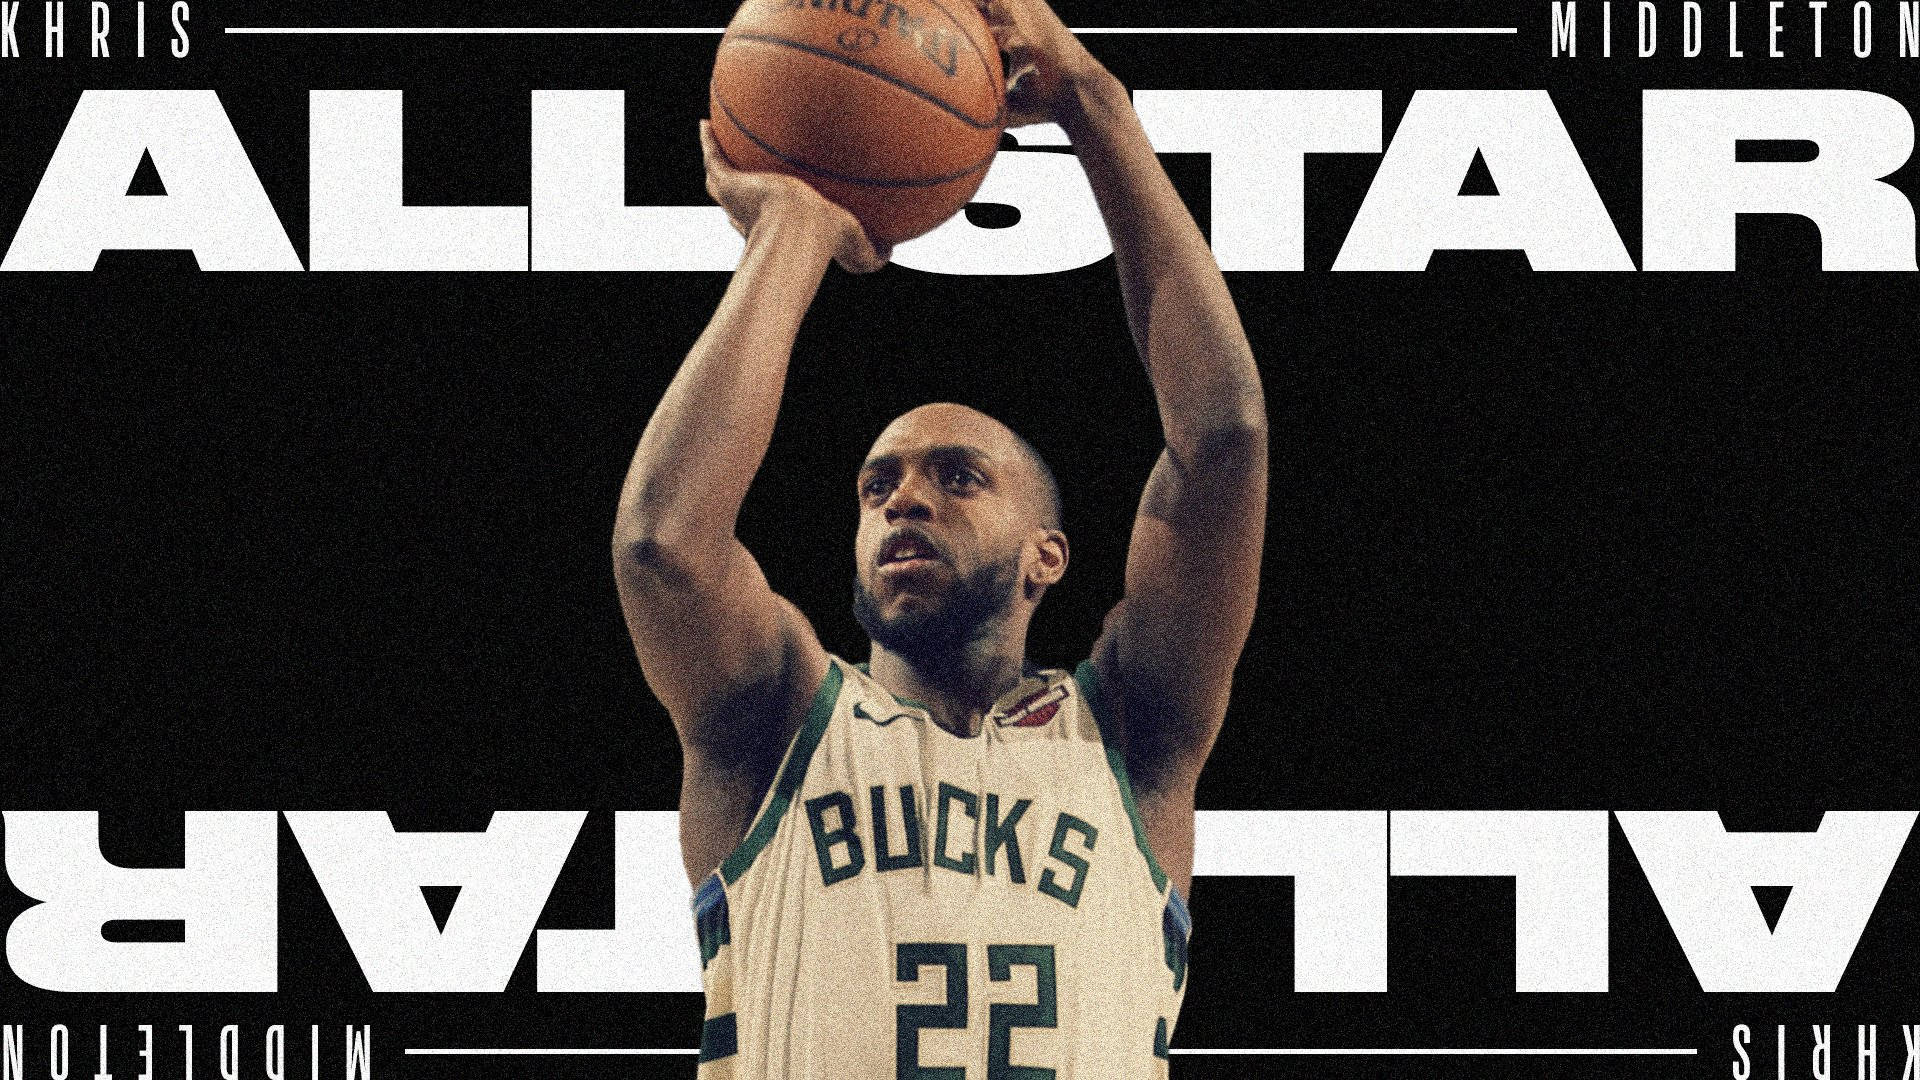 Allstar Khris Middleton Would Be Translated To 